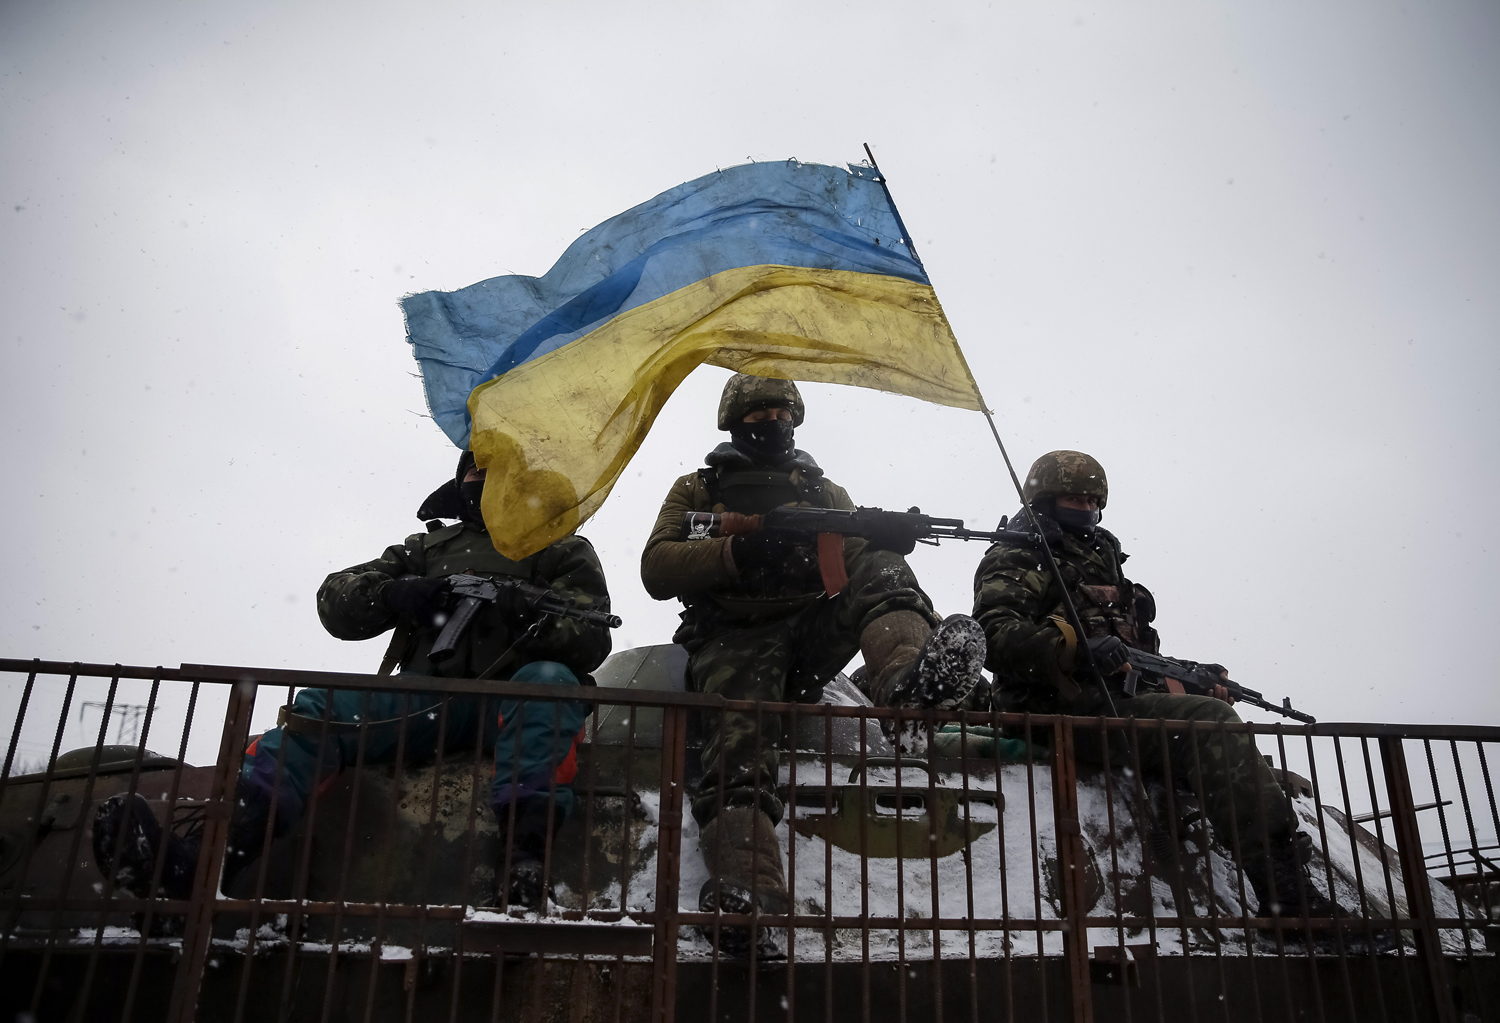 Members of the Ukrainian armed forces ride on a military vehicle near Debaltseve